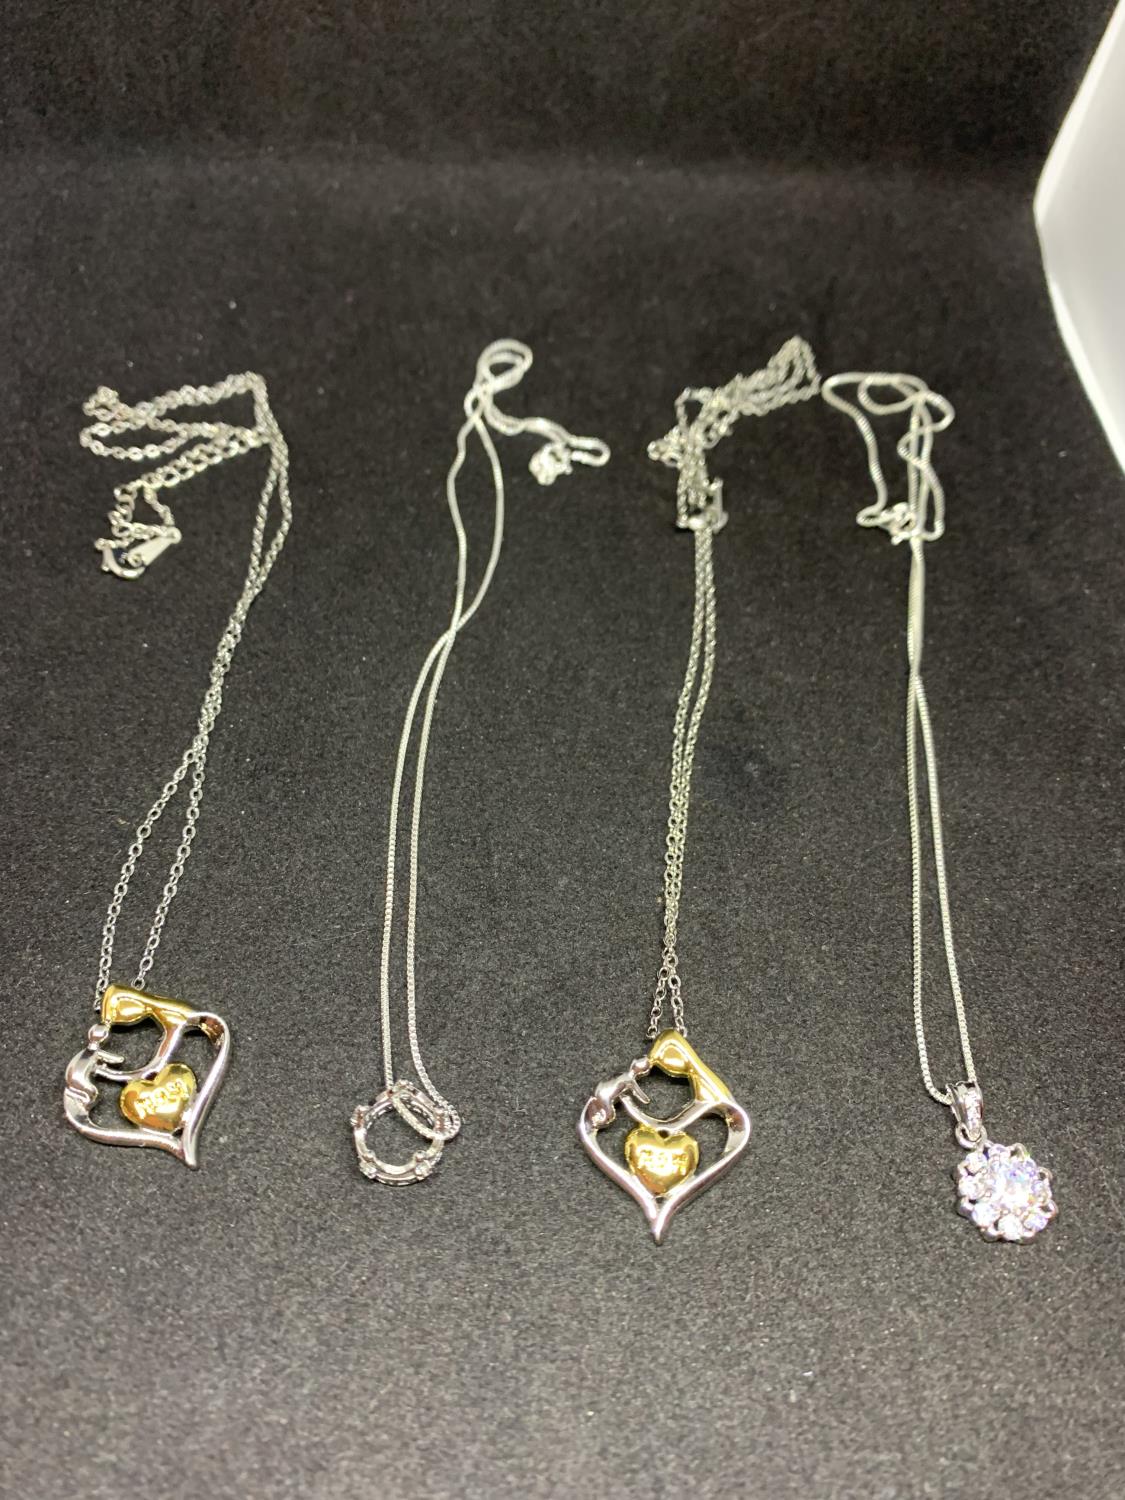 FOUR SILVER NECKLACES WITH PENDANTS TO INCLUDE HEARTS, CROWN AND FLOWER